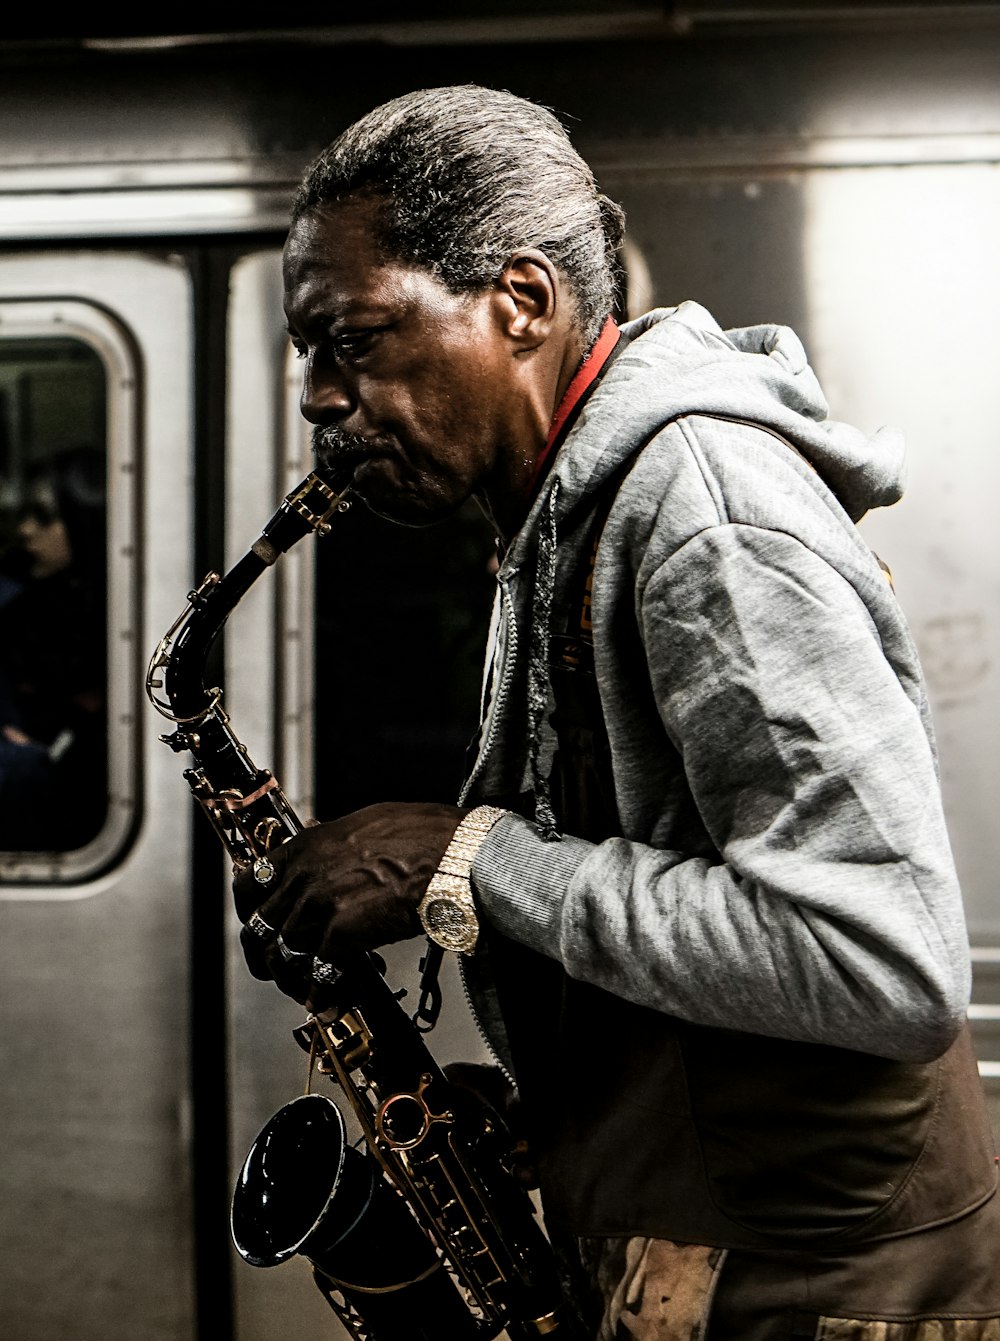 man playing wind instrument